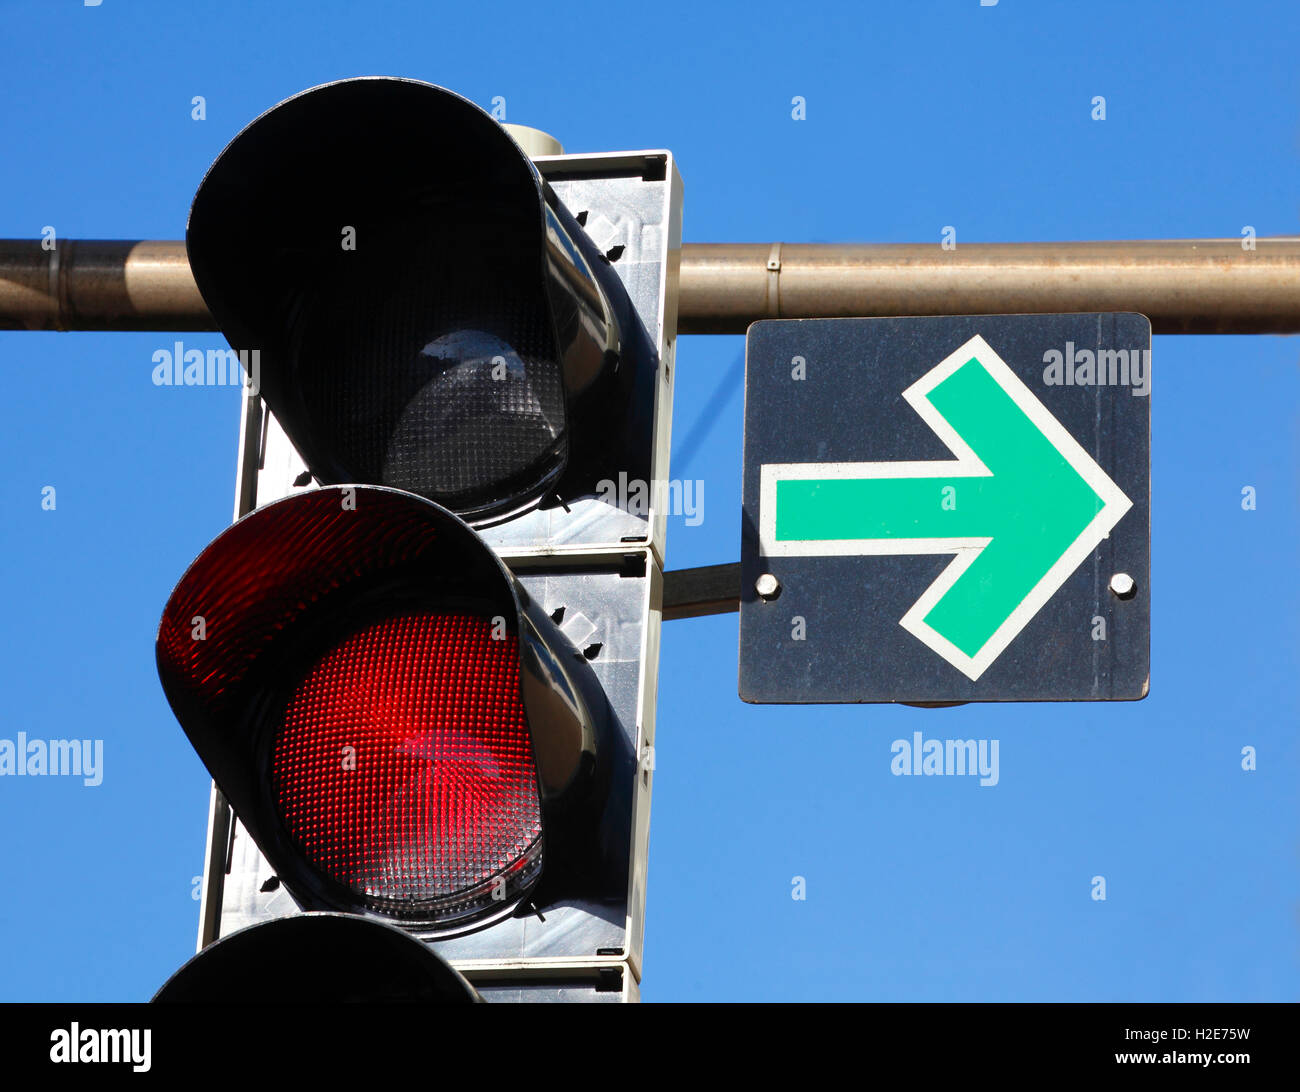 Collection 102+ Images can you turn right on red in germany Full HD, 2k, 4k